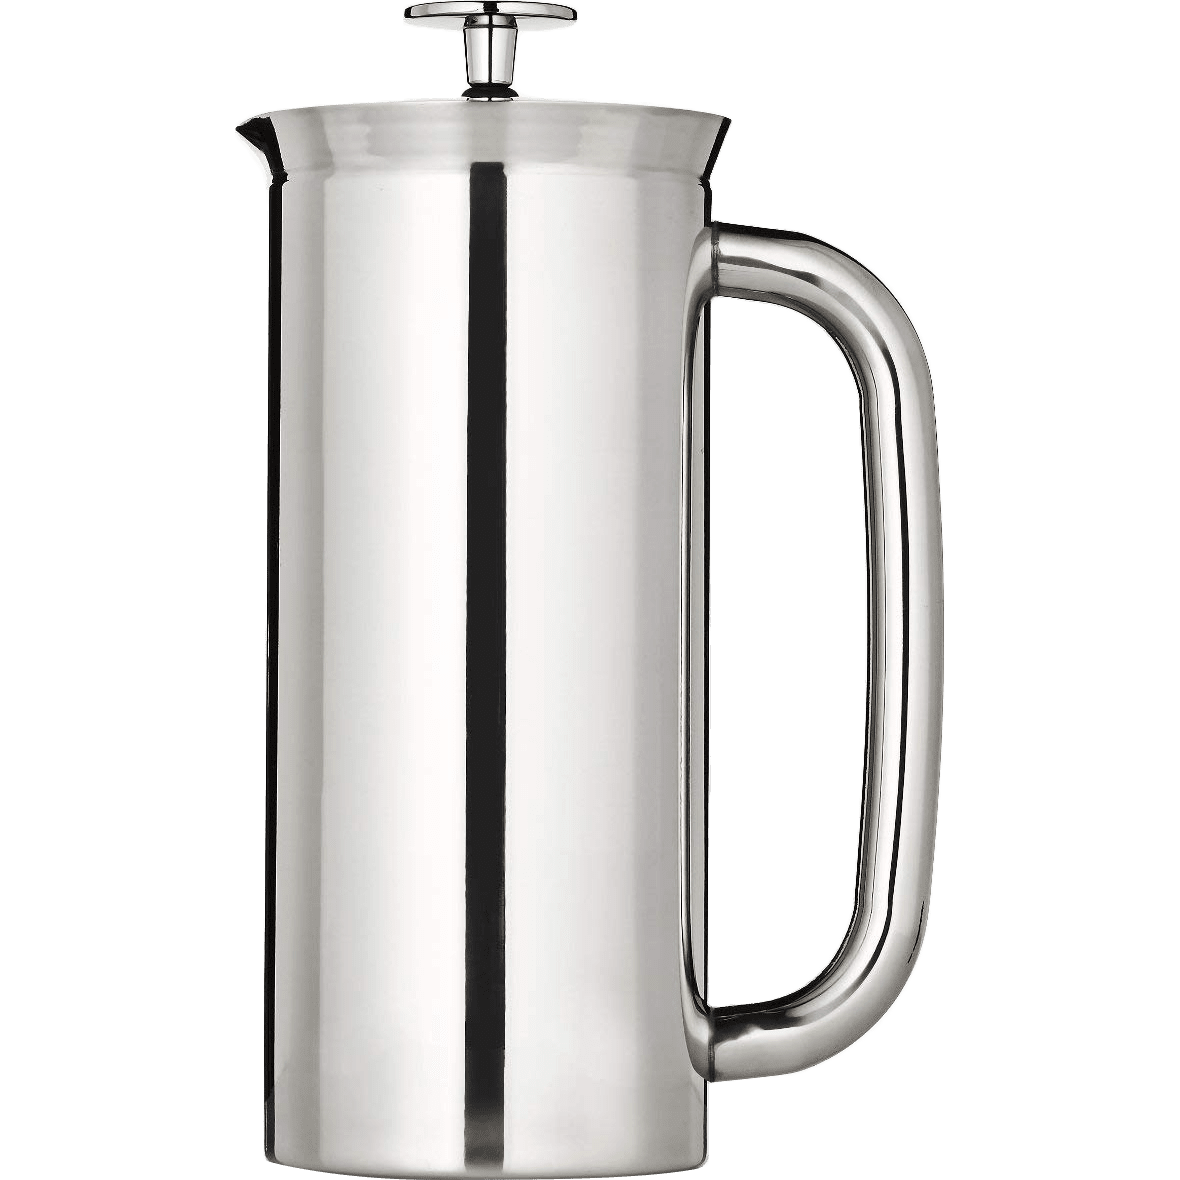 ESPRO P7 Stainless Steel French Press | Quench Essentials Espro P7 Stainless Steel French Press